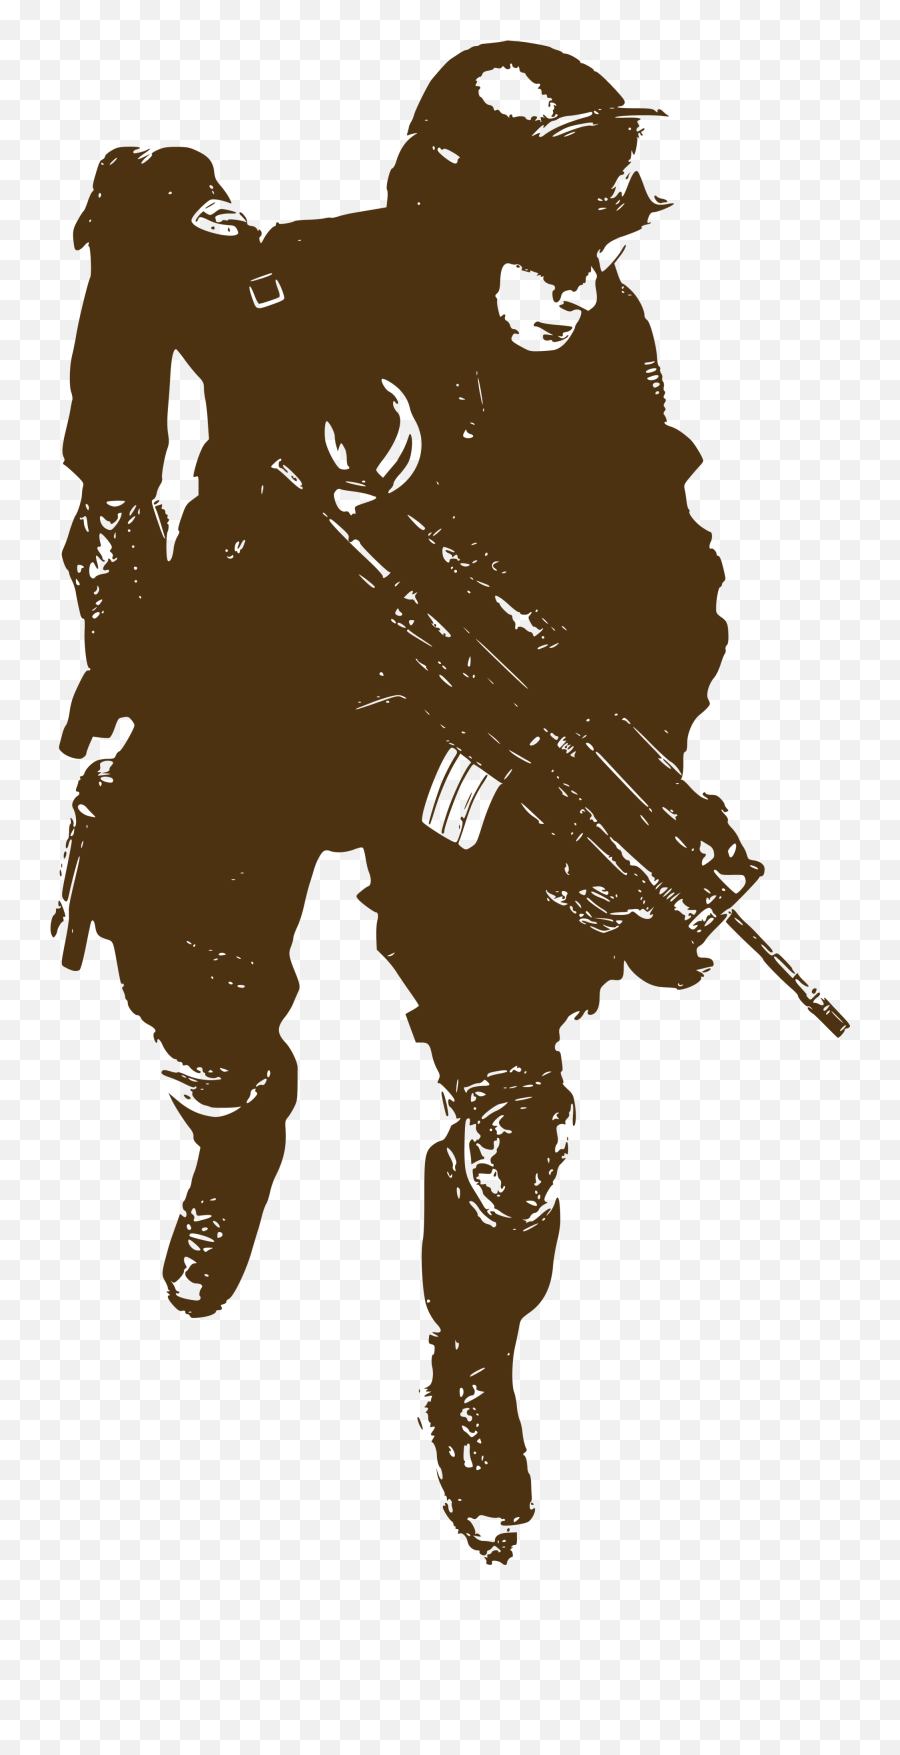 Soldier Sticker Military Decal - Brown Line Soldier Png Call Of Duty Soldier Silhouette Stickers,Call Of Duty Soldier Png